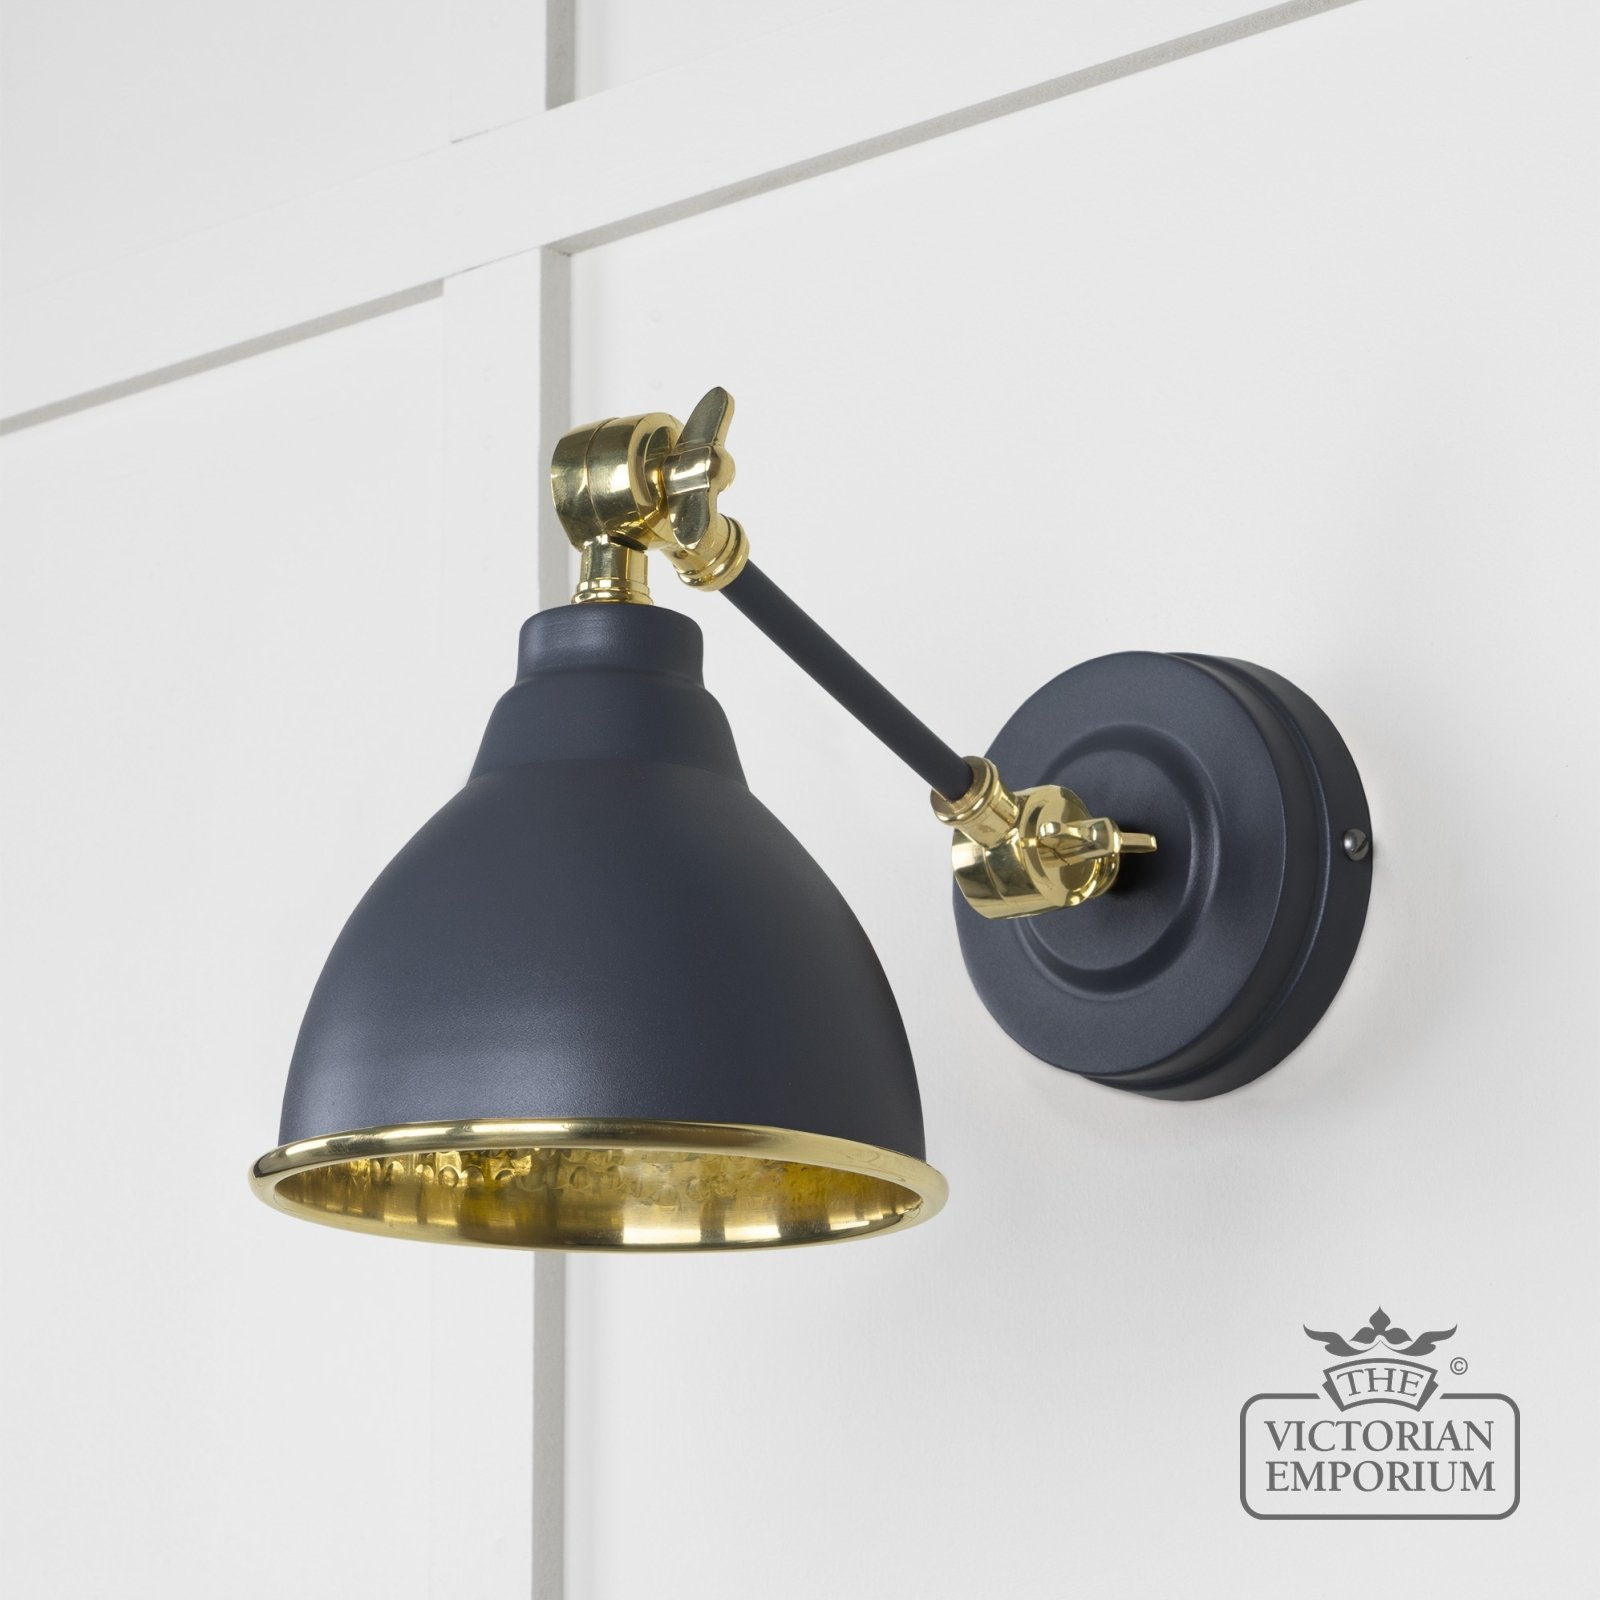 Brindle Wall Light in Hammered Brass with Slate Exterior